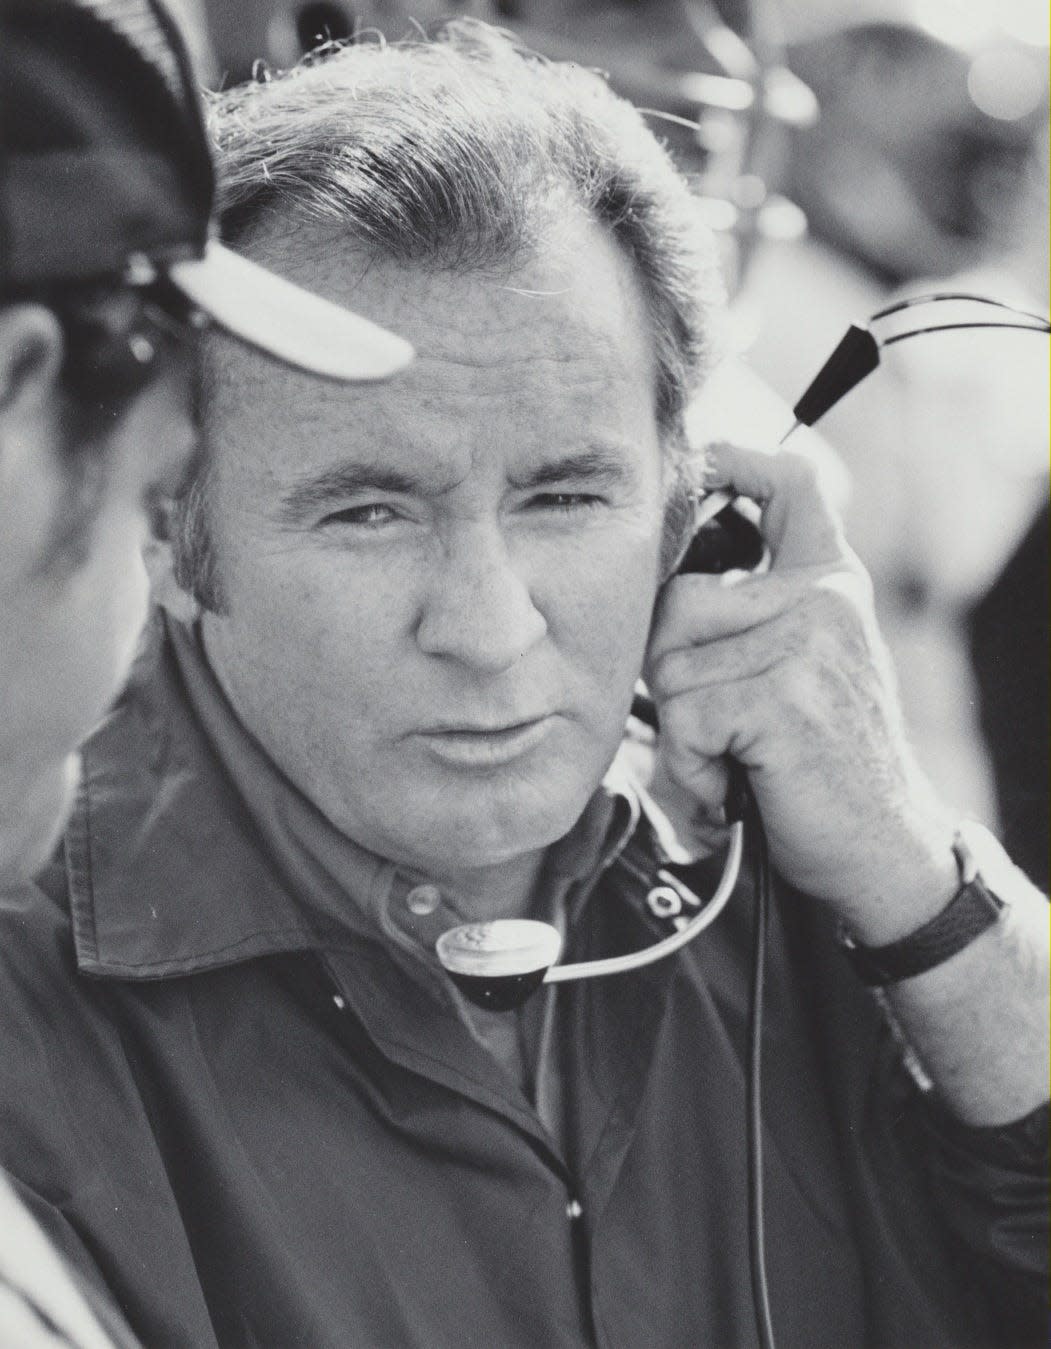 Kent State head football coach Don James confers with an assistant on the sideline during a game in an undated photo.